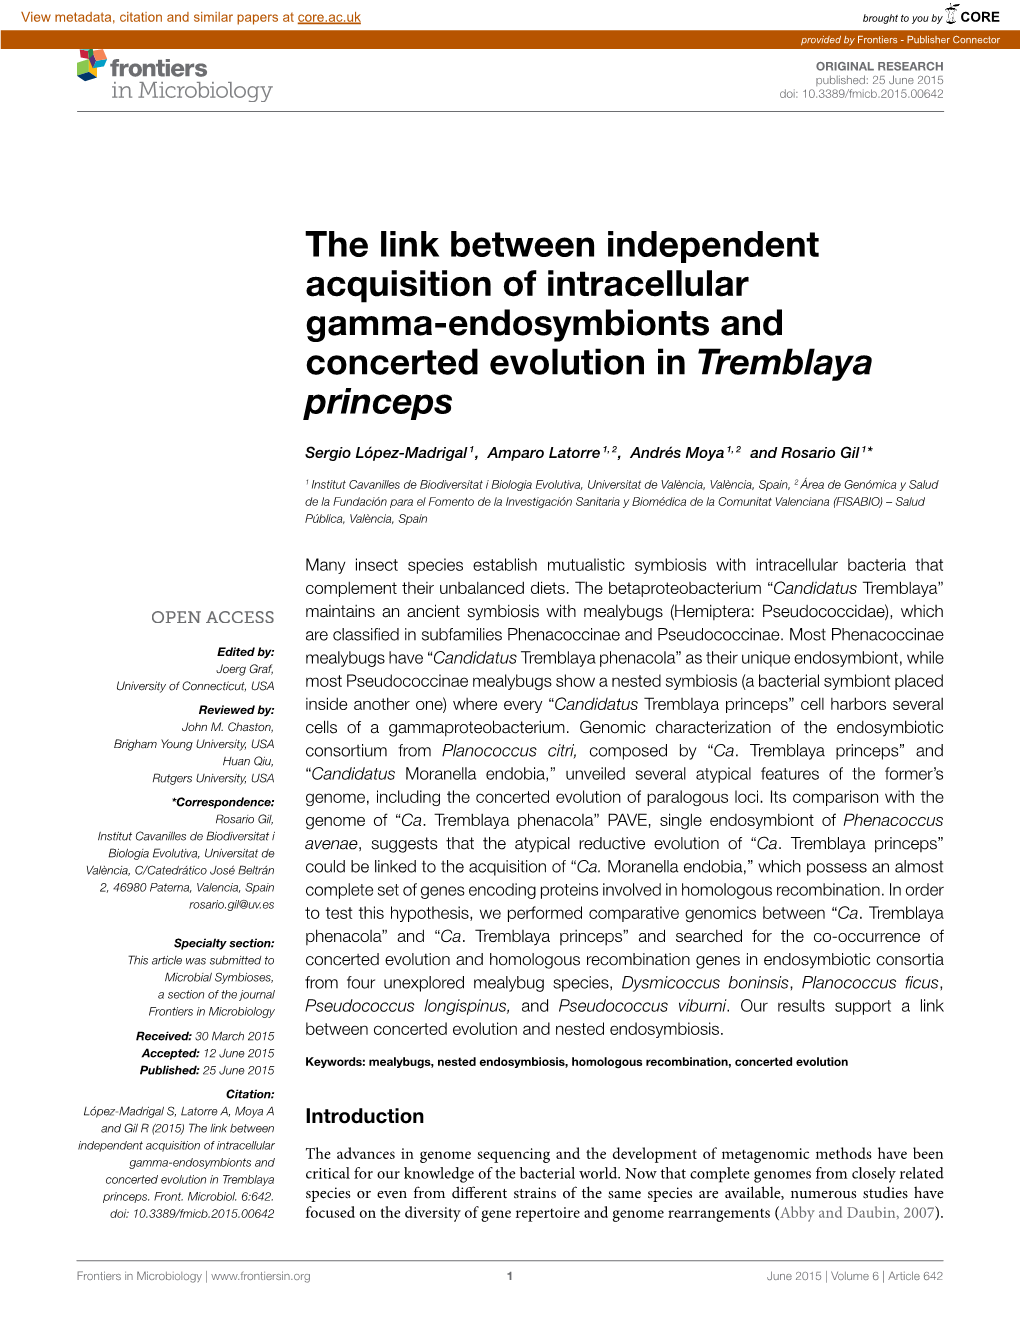 The Link Between Independent Acquisition of Intracellular Gamma-Endosymbionts and Concerted Evolution in Tremblaya Princeps